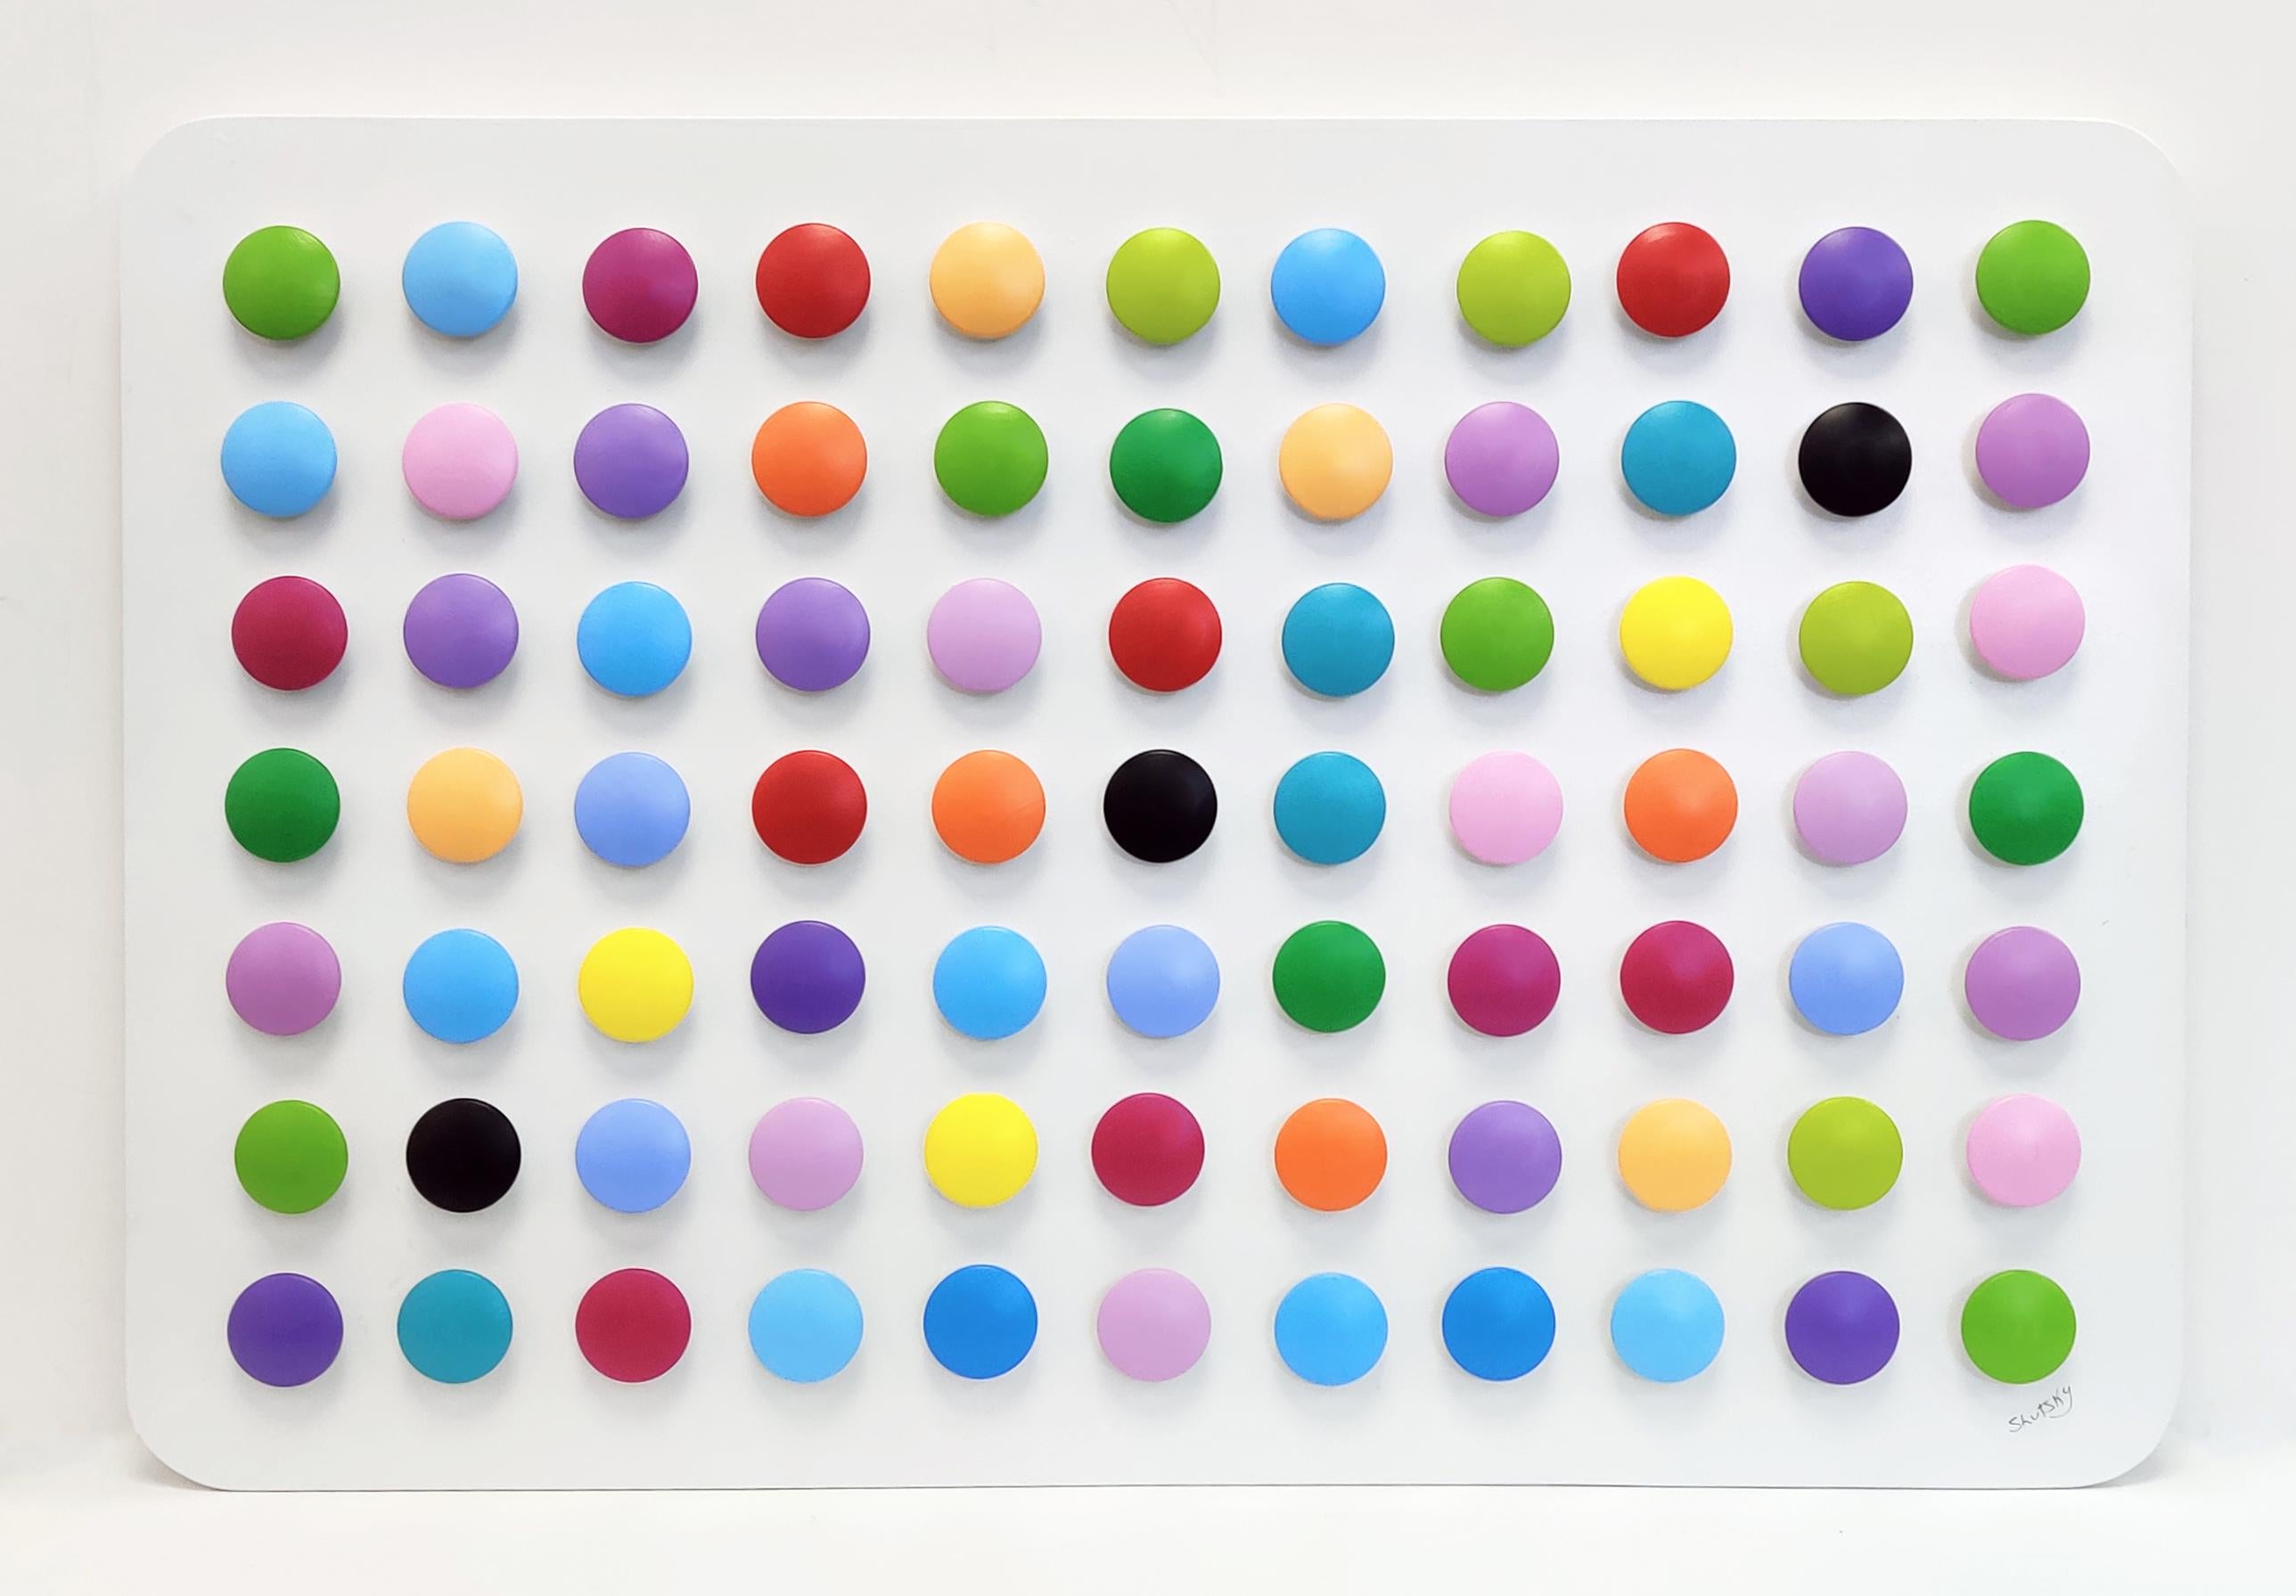 HOMAGE TO HIRST (DIMENSIONAL PIECES OF WOOD WITH MAGNETS)